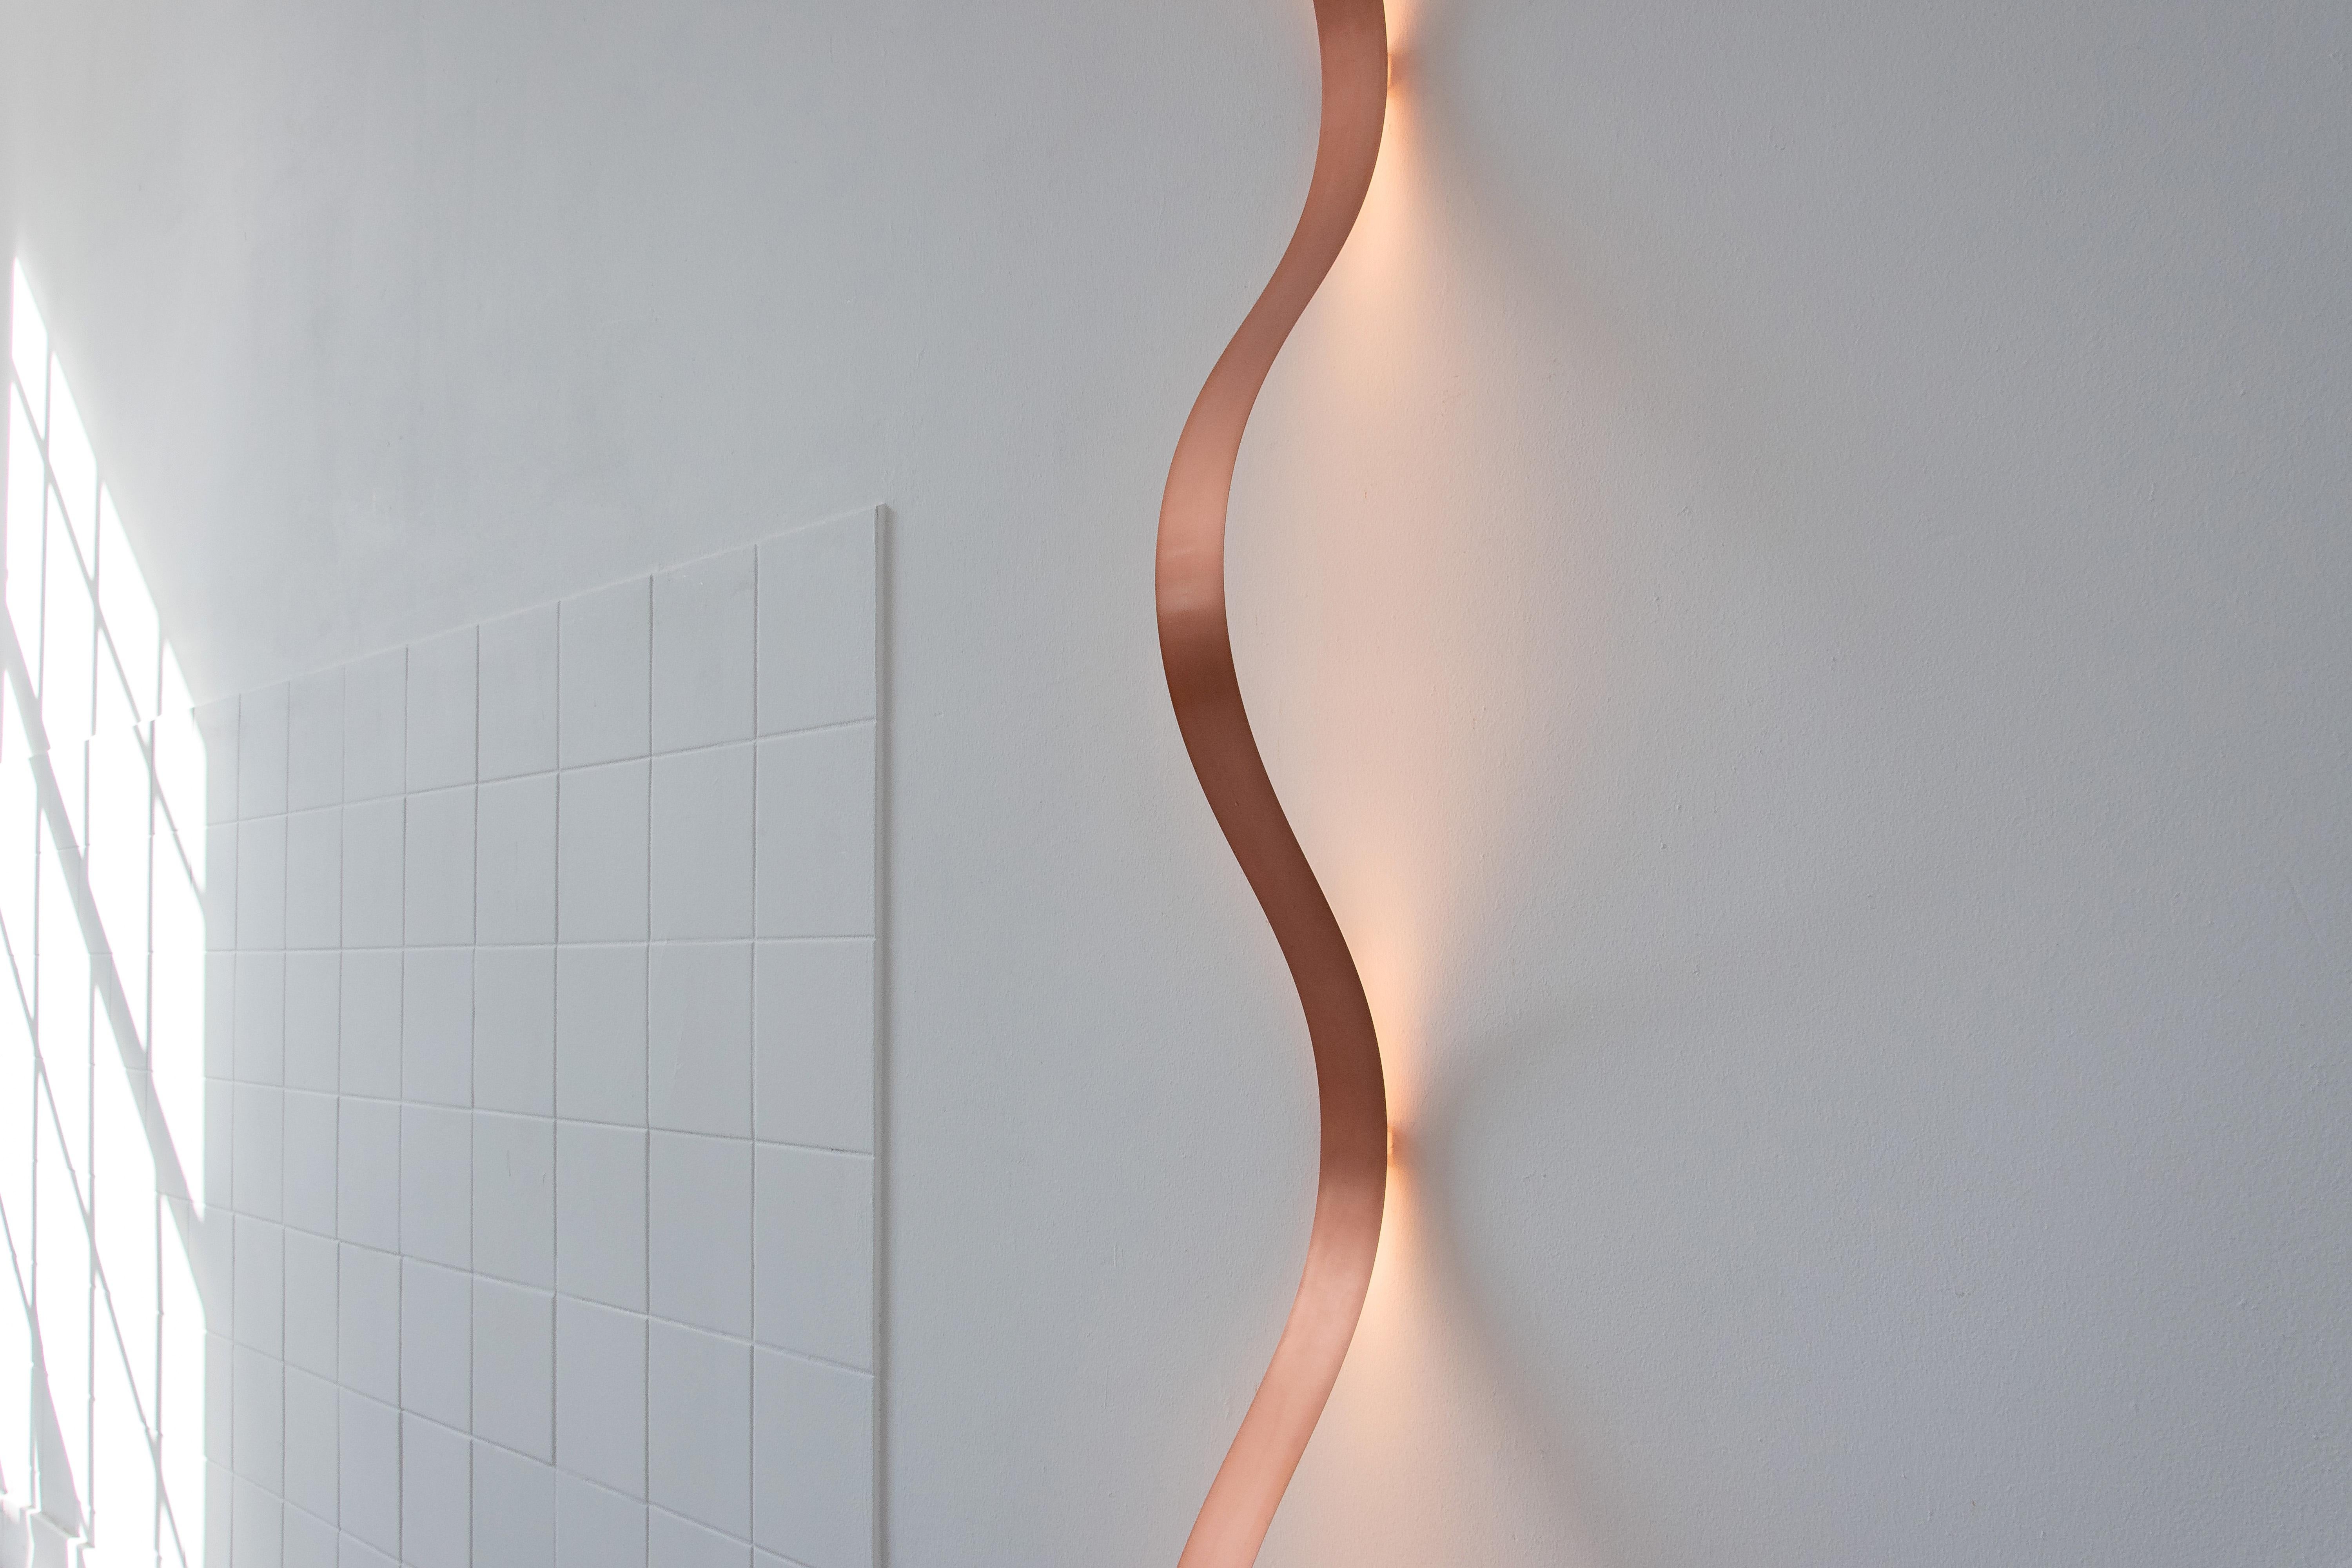 The Sine Lights are made out of powdercoated spring steel strips. By fixing the lamp to the wall or ceiling with small brackets, the wave form appears as a result of the tension in the material.

The LED lighting on the back gives of a pleasant